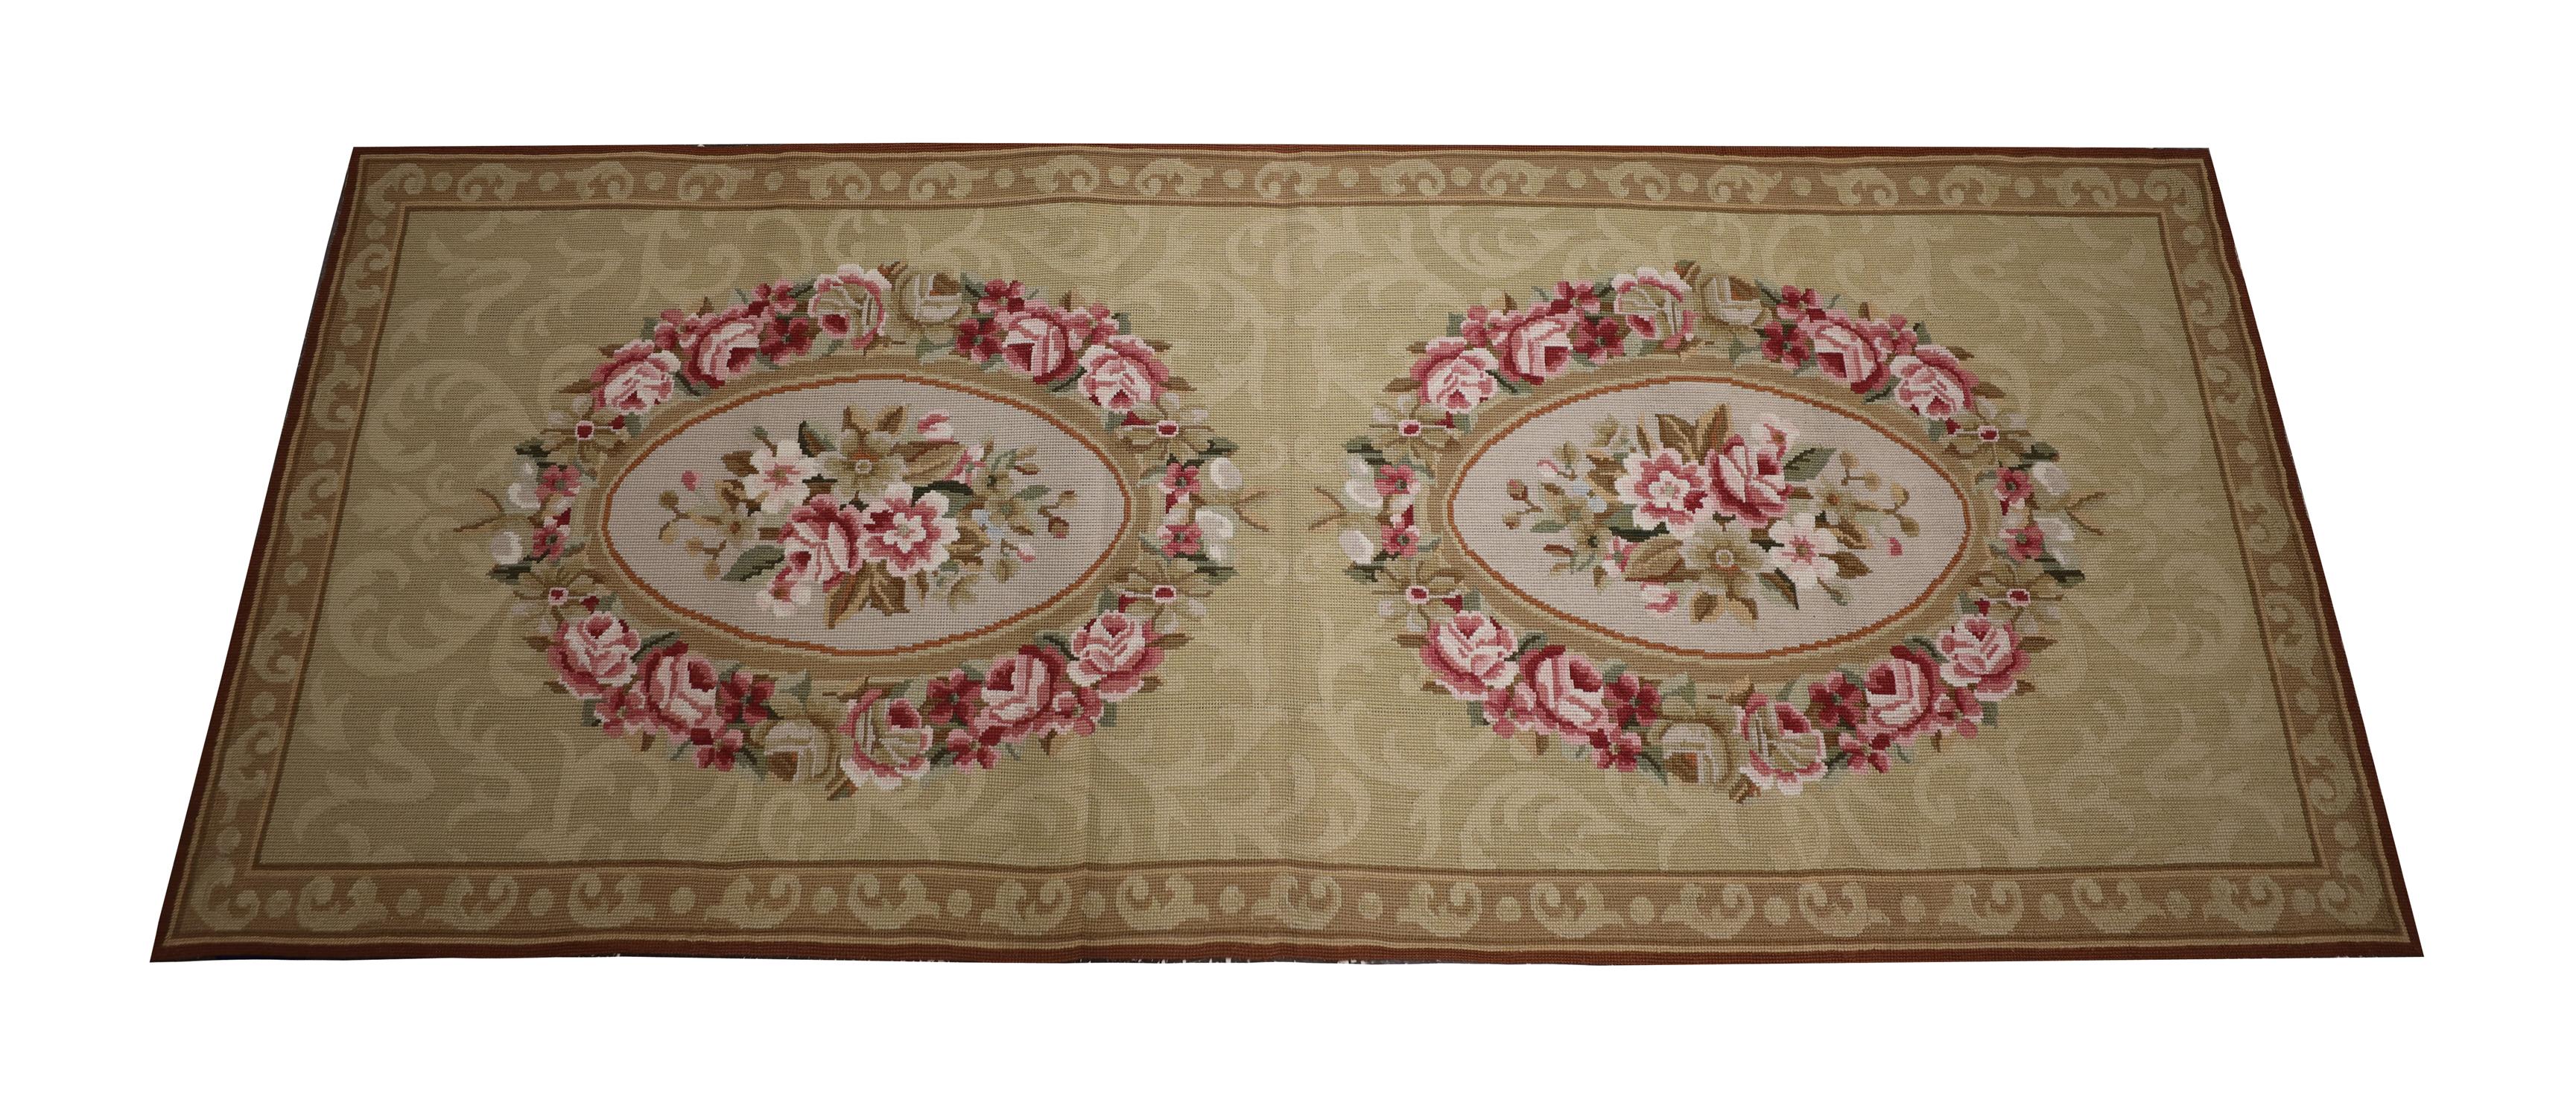 This elegant needlepoint rug was woven by hand in the early 21st century, using traditional techniques and materials. The beautiful design features two oval, floral medallions woven in pink, ivory and green accents on a cream repeat pattern